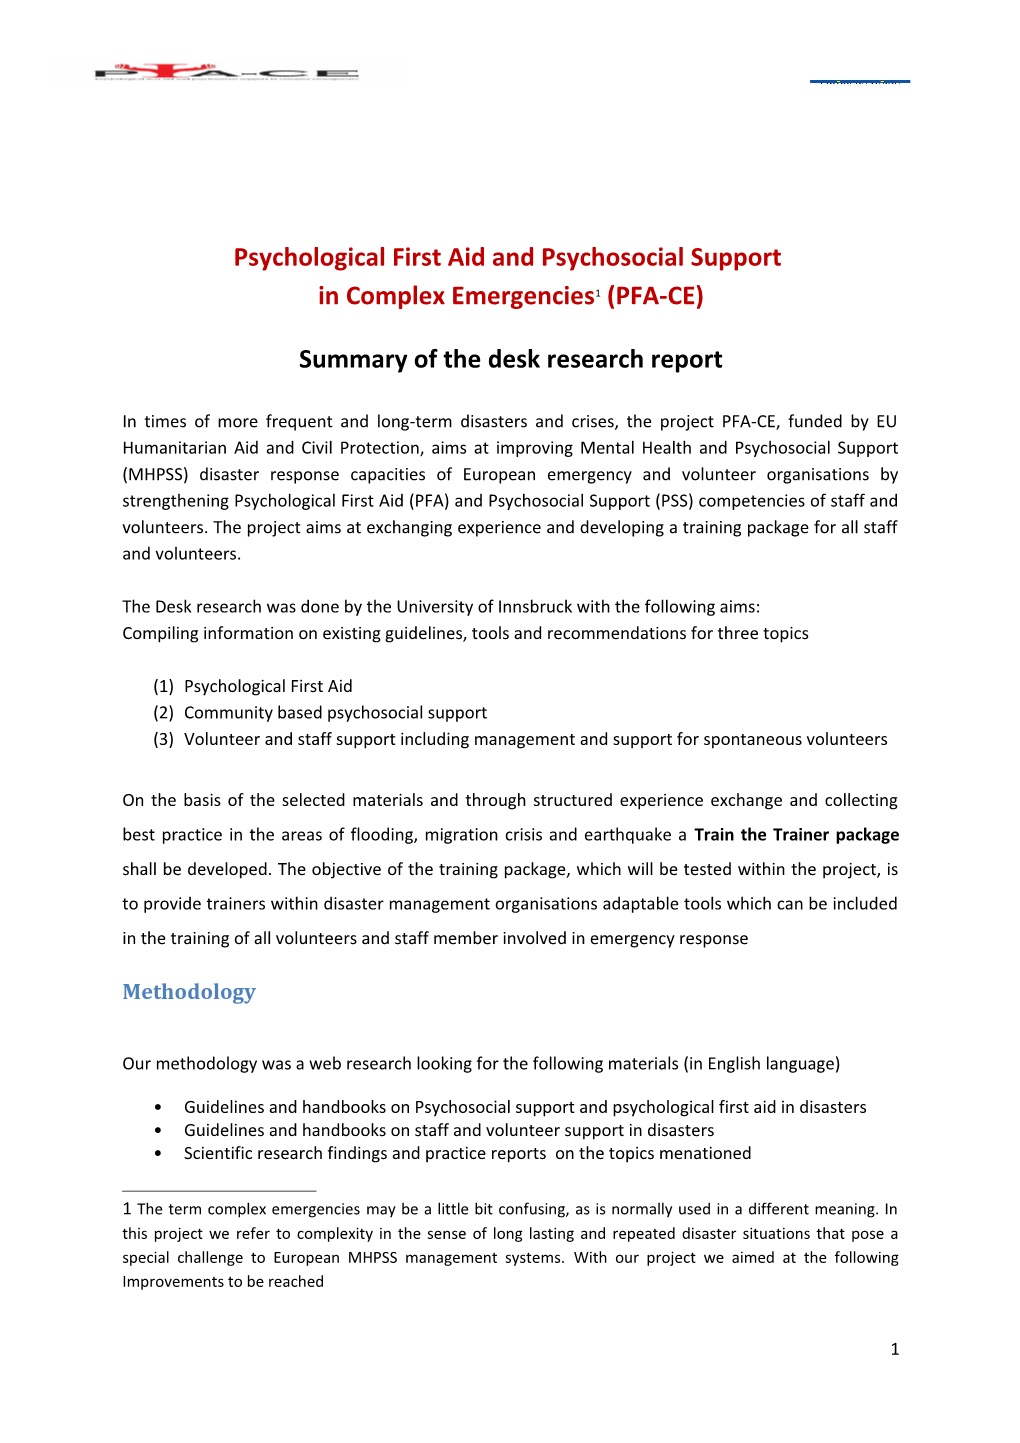 Psychological First Aid and Psychosocial Support